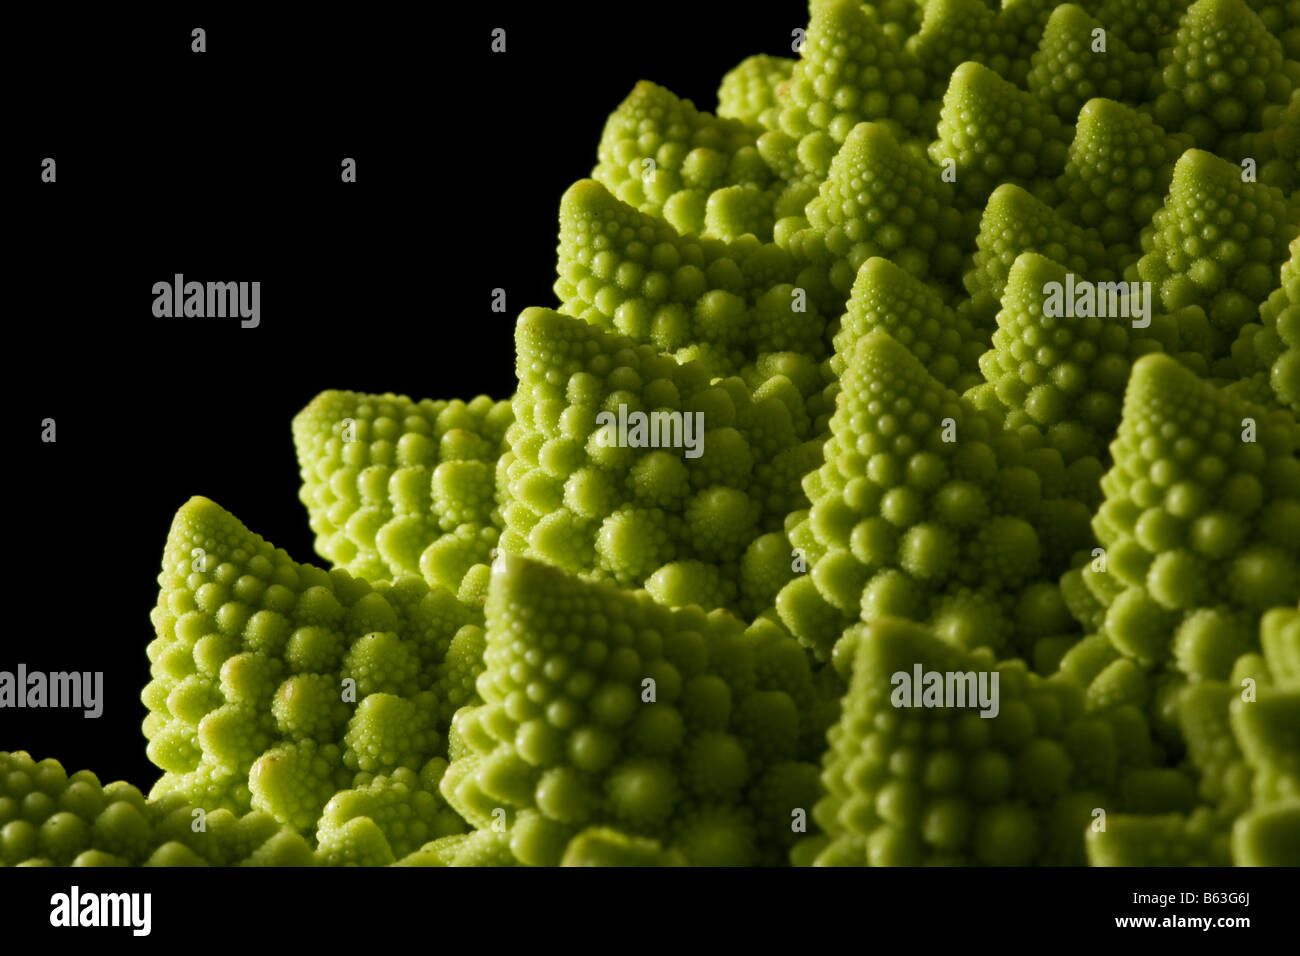 A detail showing the fractoid florets of the Romanesco Cauliflower Stock Photo